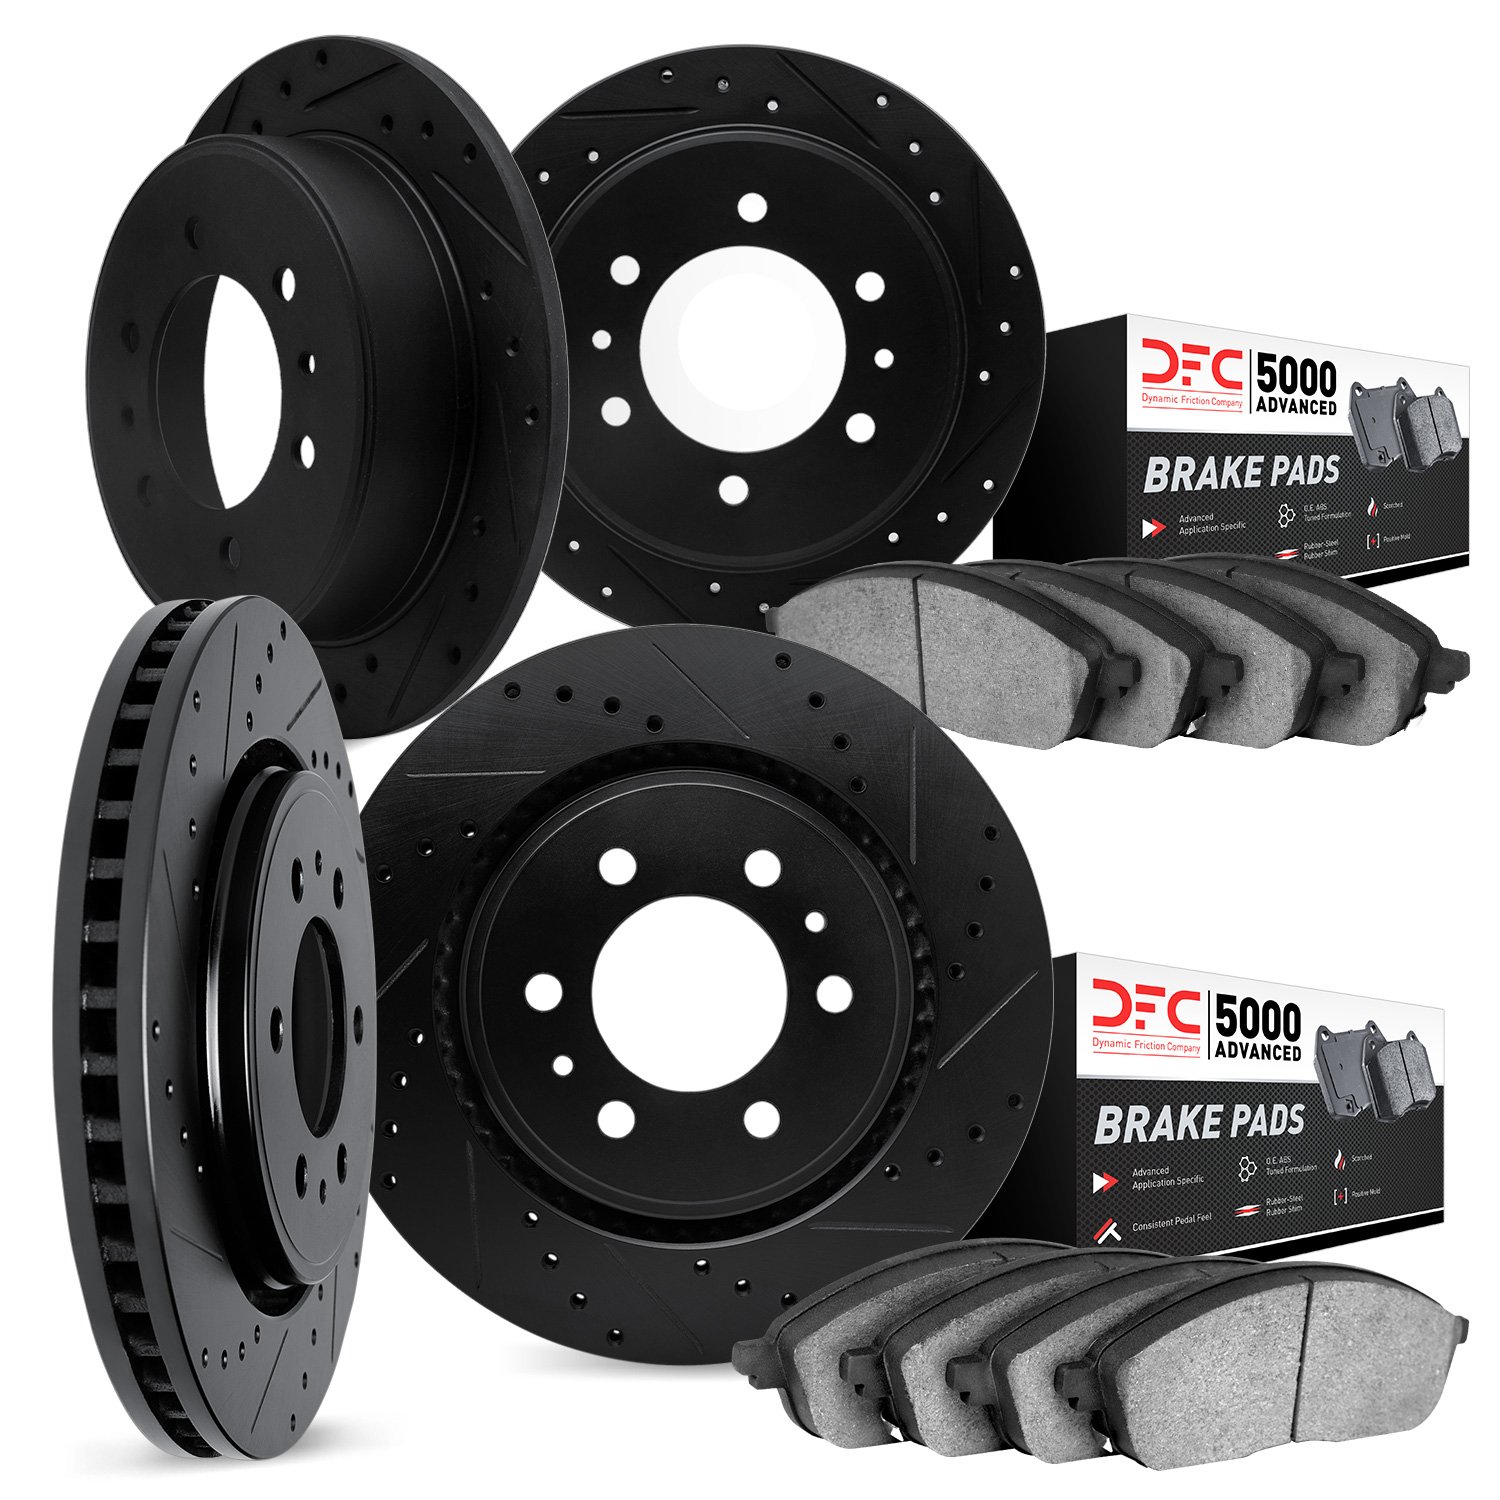 8504-52008 Drilled/Slotted Brake Rotors w/5000 Advanced Brake Pads Kit [Black], 2006-2006 GM, Position: Front and Rear